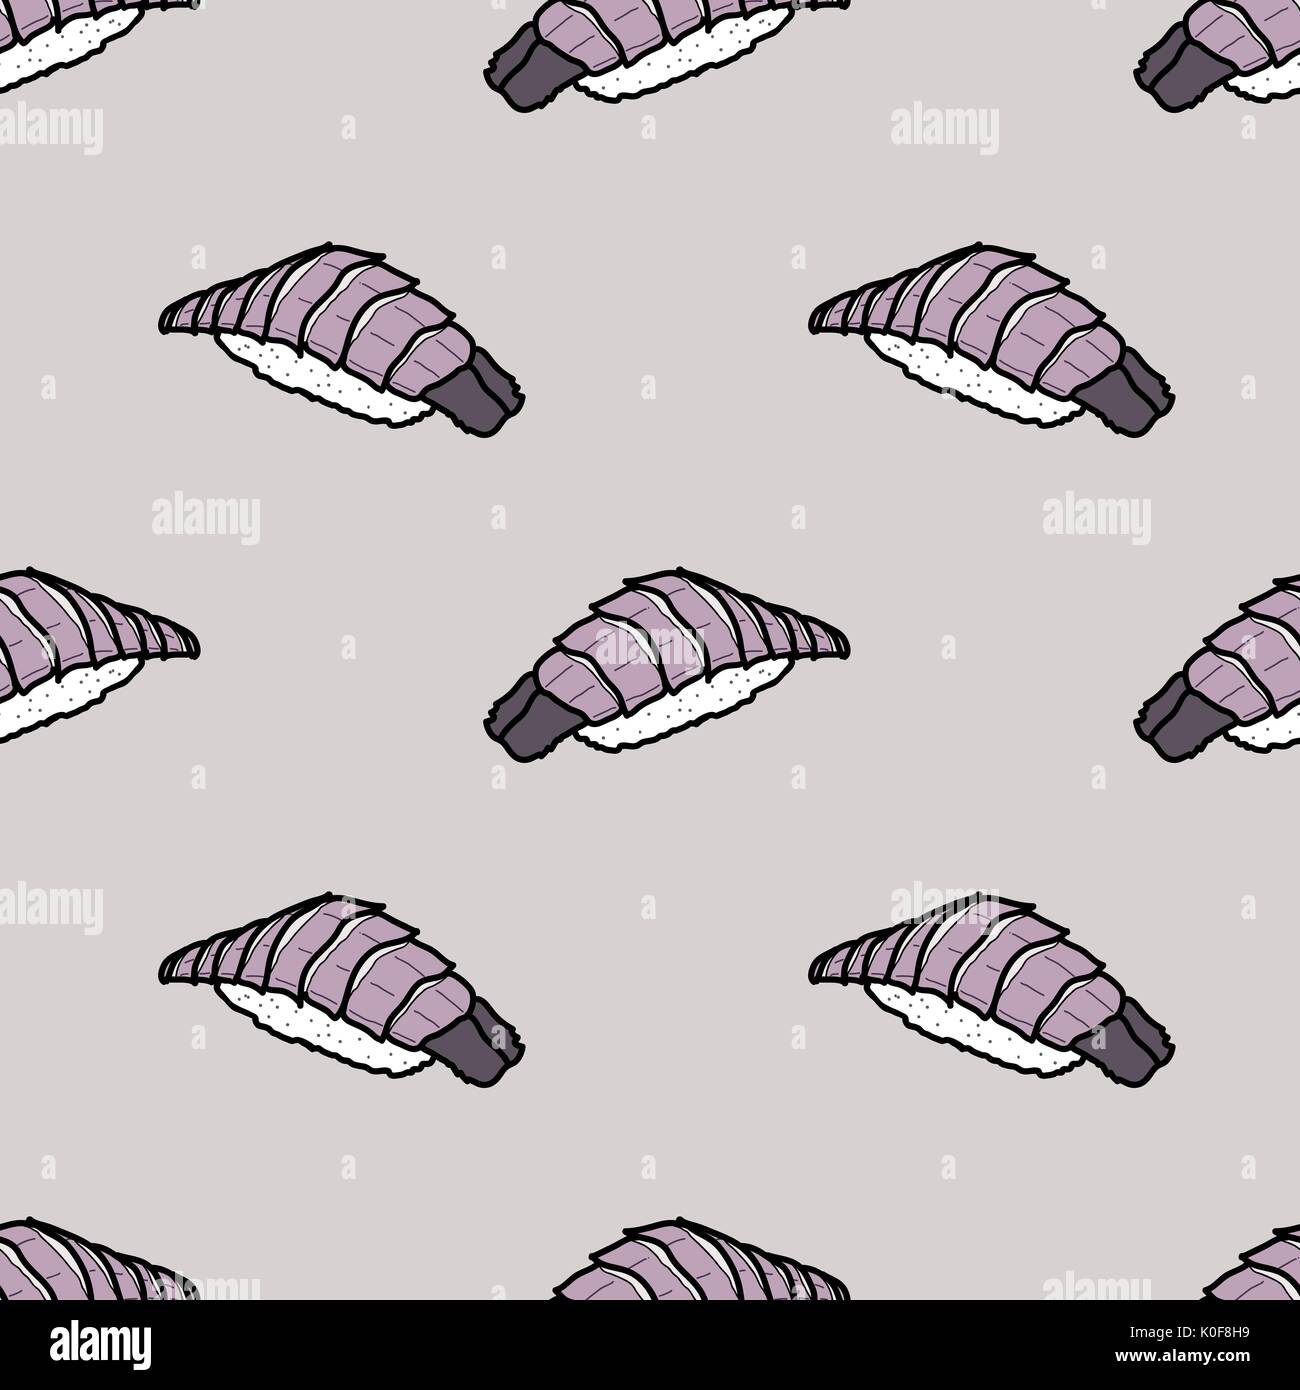 Colorful shako sushi on light purple background. Cute japanese food illustration hand drawn style. Seamless pattern design. Stock Vector